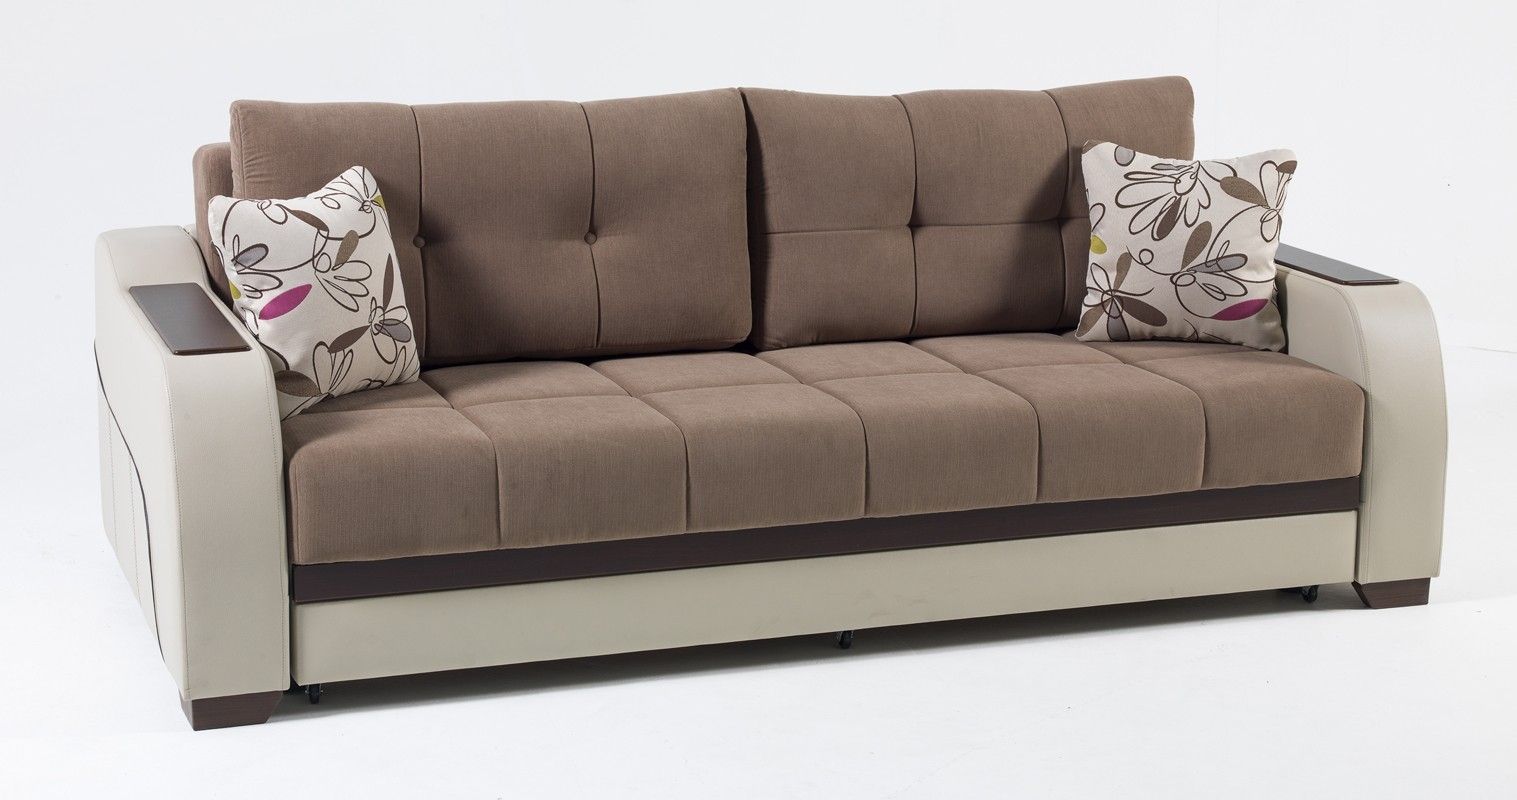 Modern Sofa Chair Pertaining To Contemporary Sofas And Chairs (View 5 of 15)